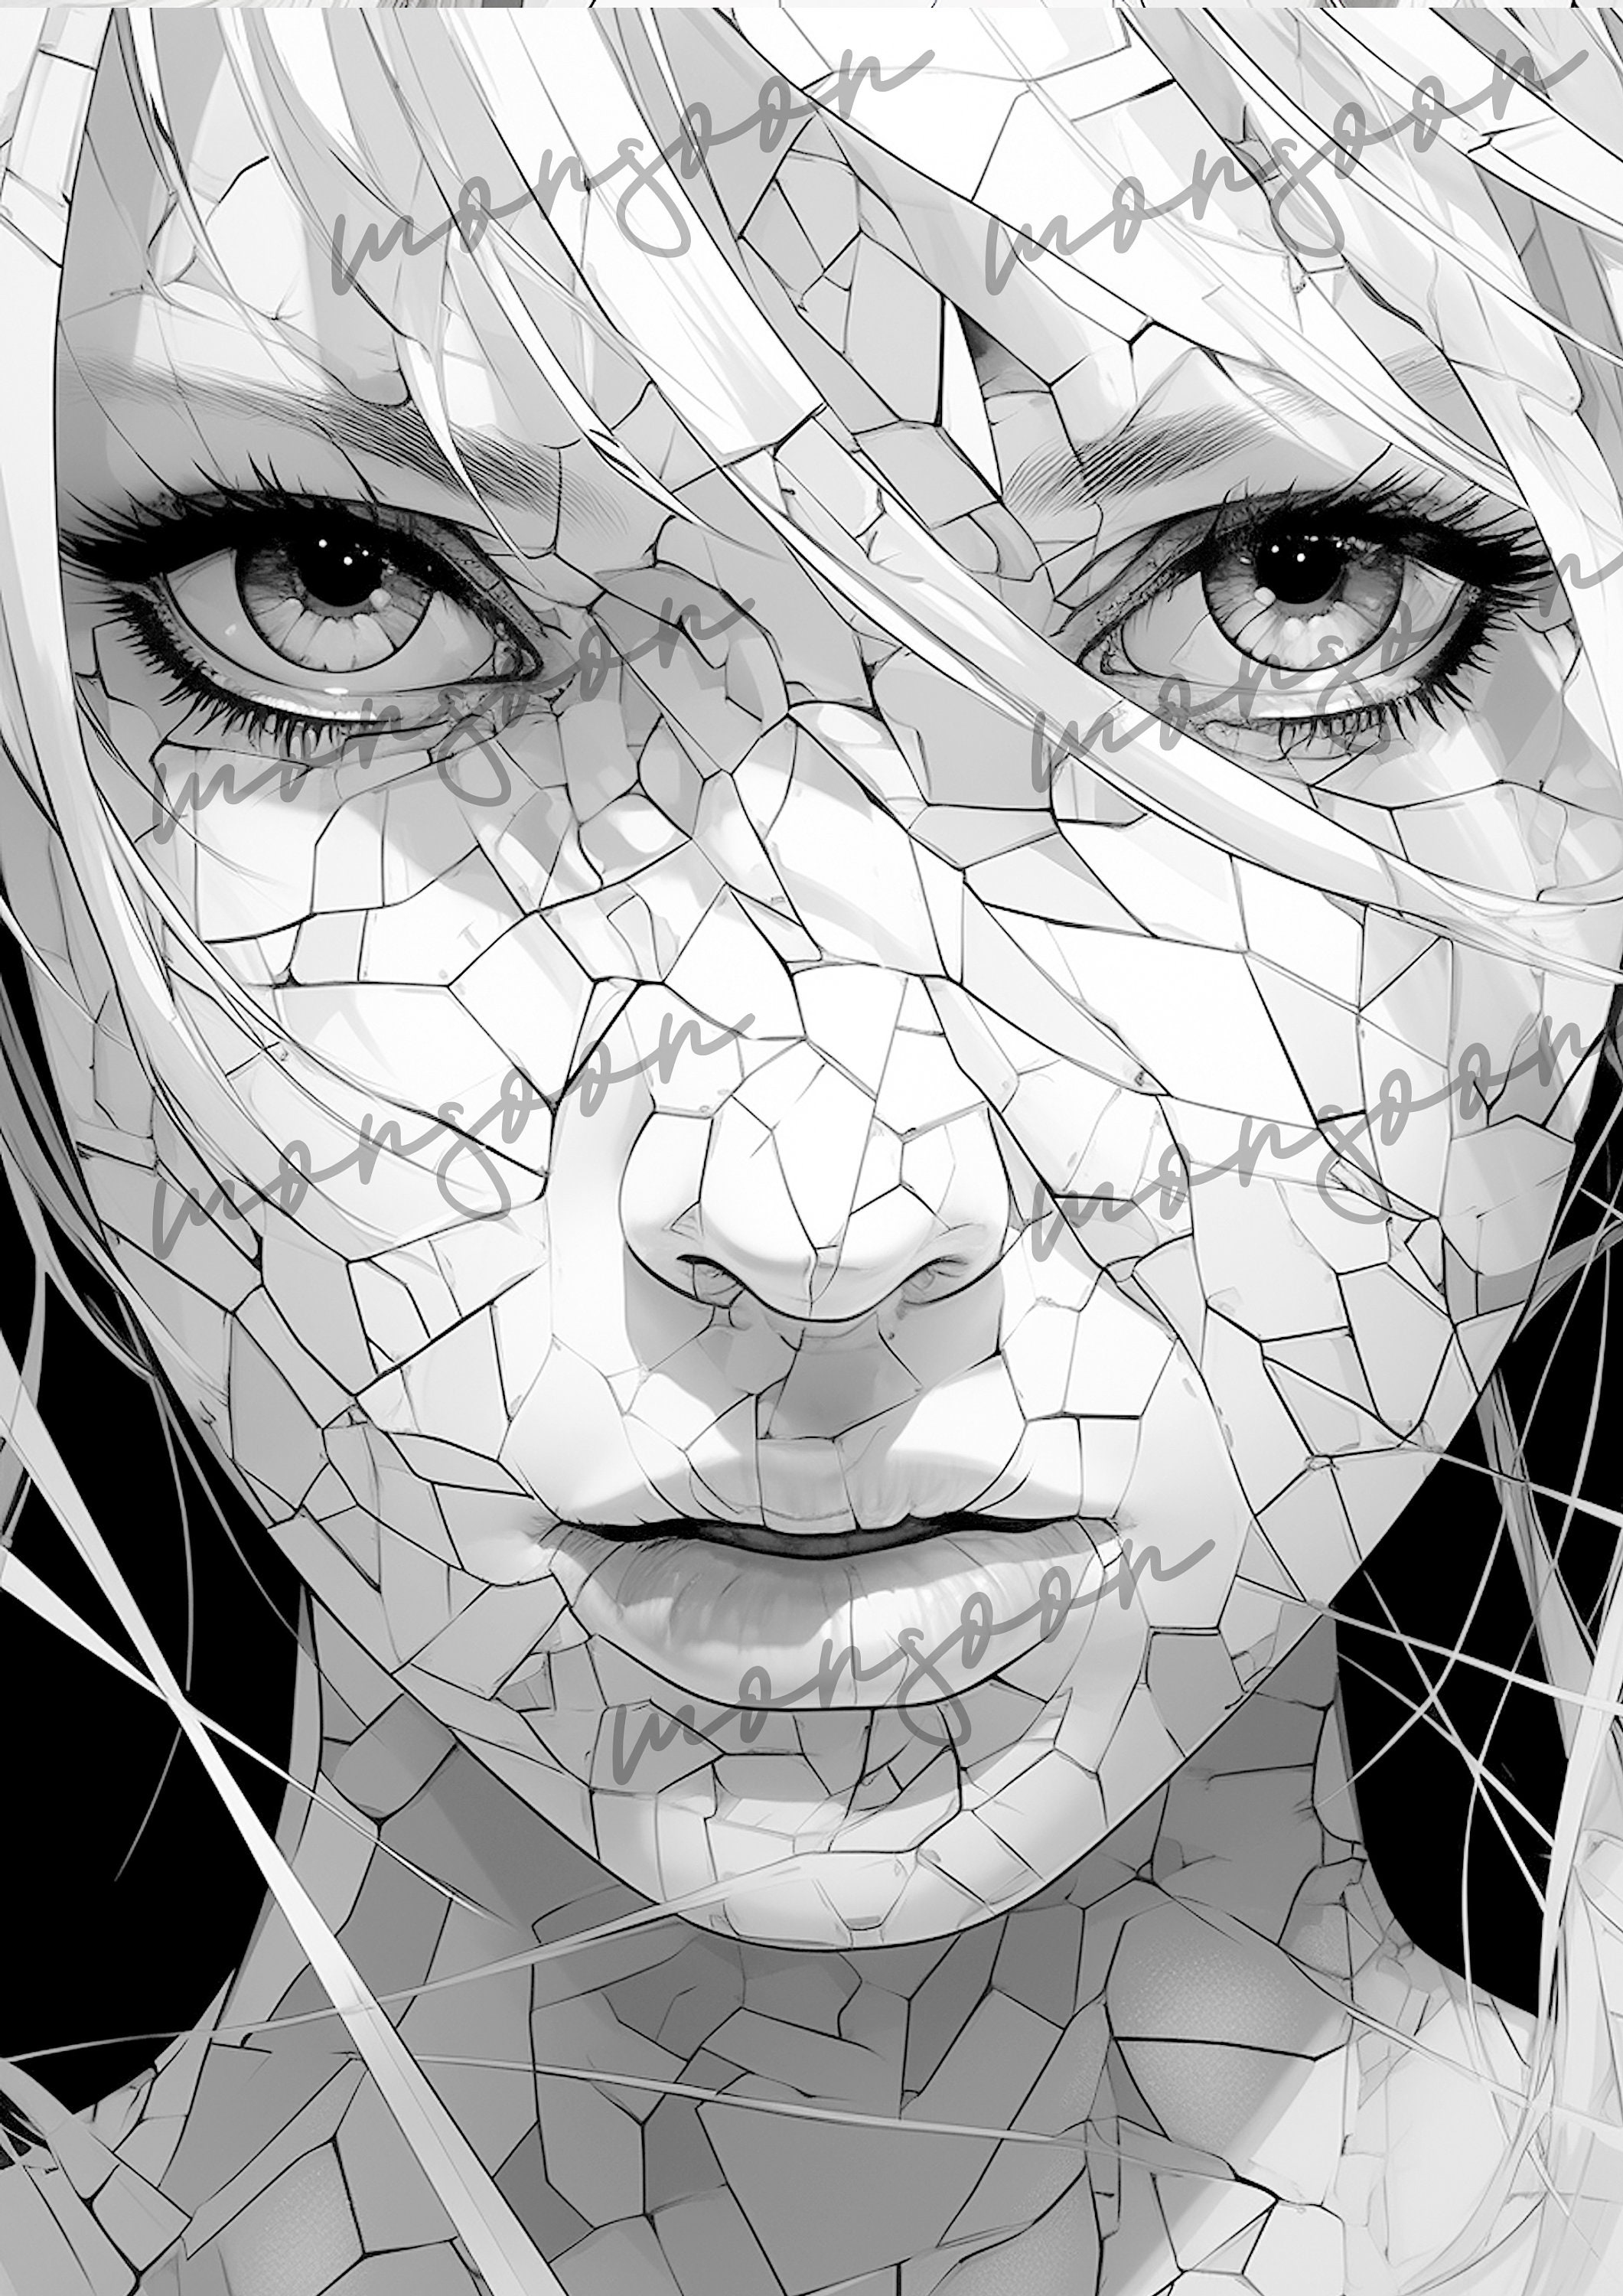 Abstract Faces Coloring Book for Adults: Grayscale Faces Coloring Book  Women Portraits Coloring Book Fractal Faces grayscale coloring book A4 64P  (Paperback)